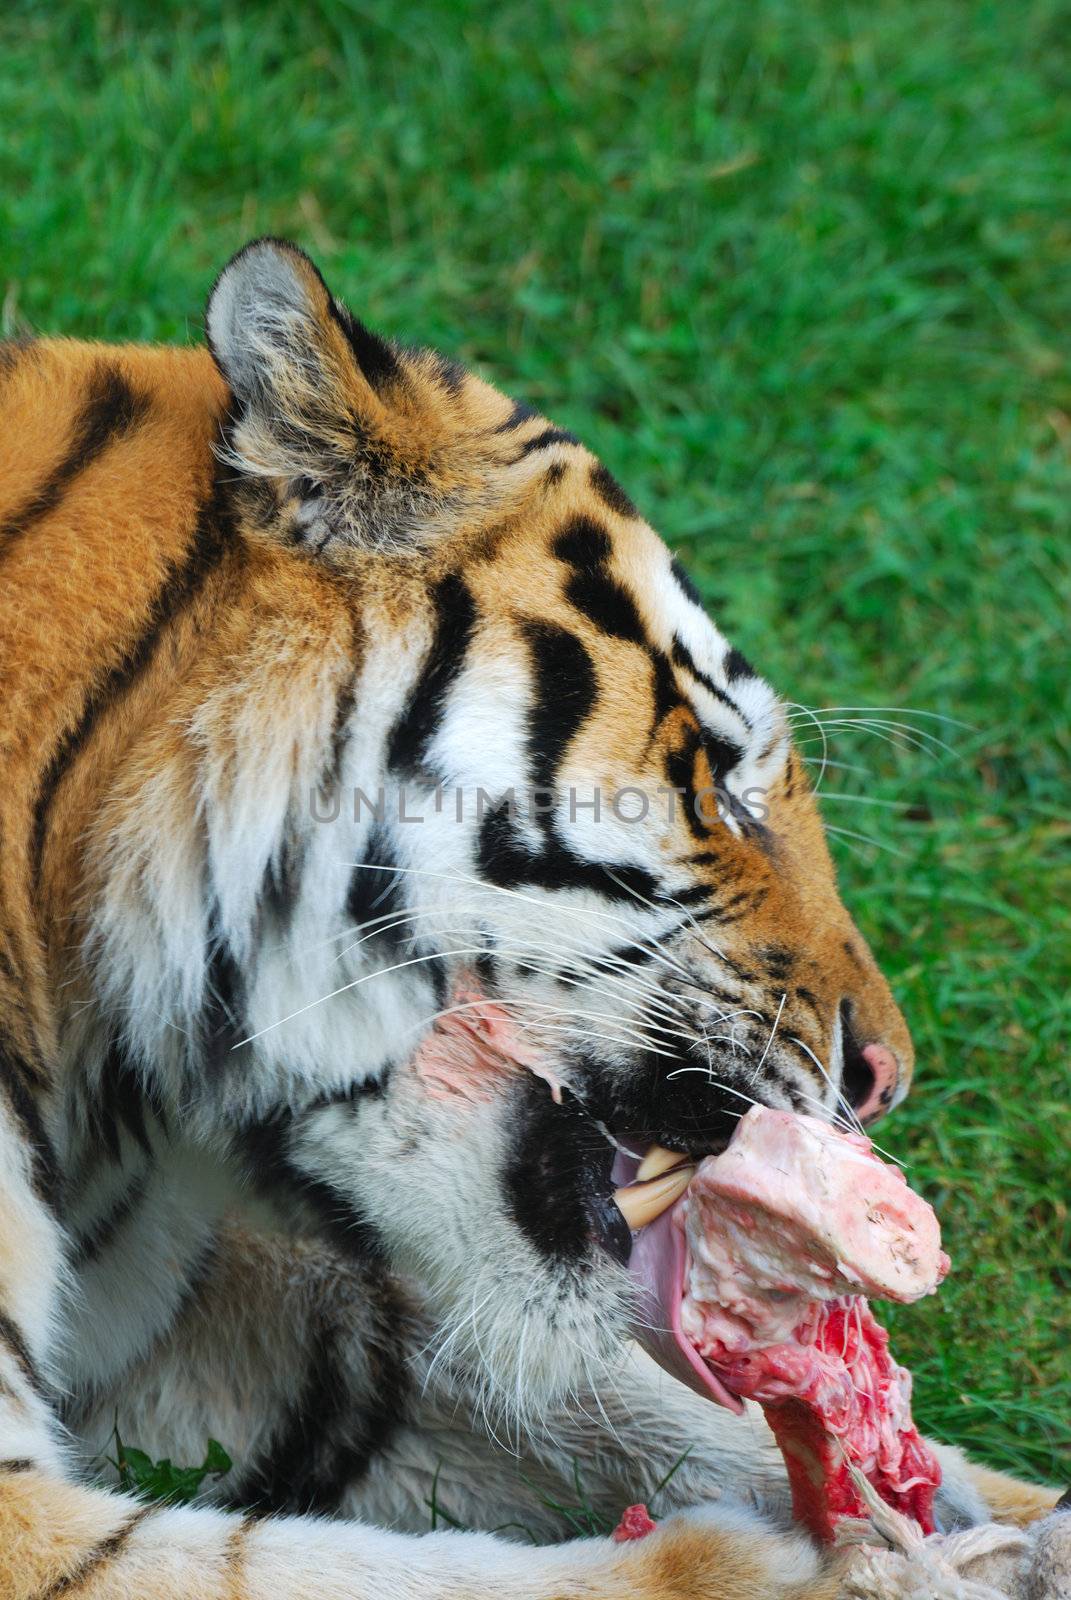 Tiger eating raw meat by pauws99